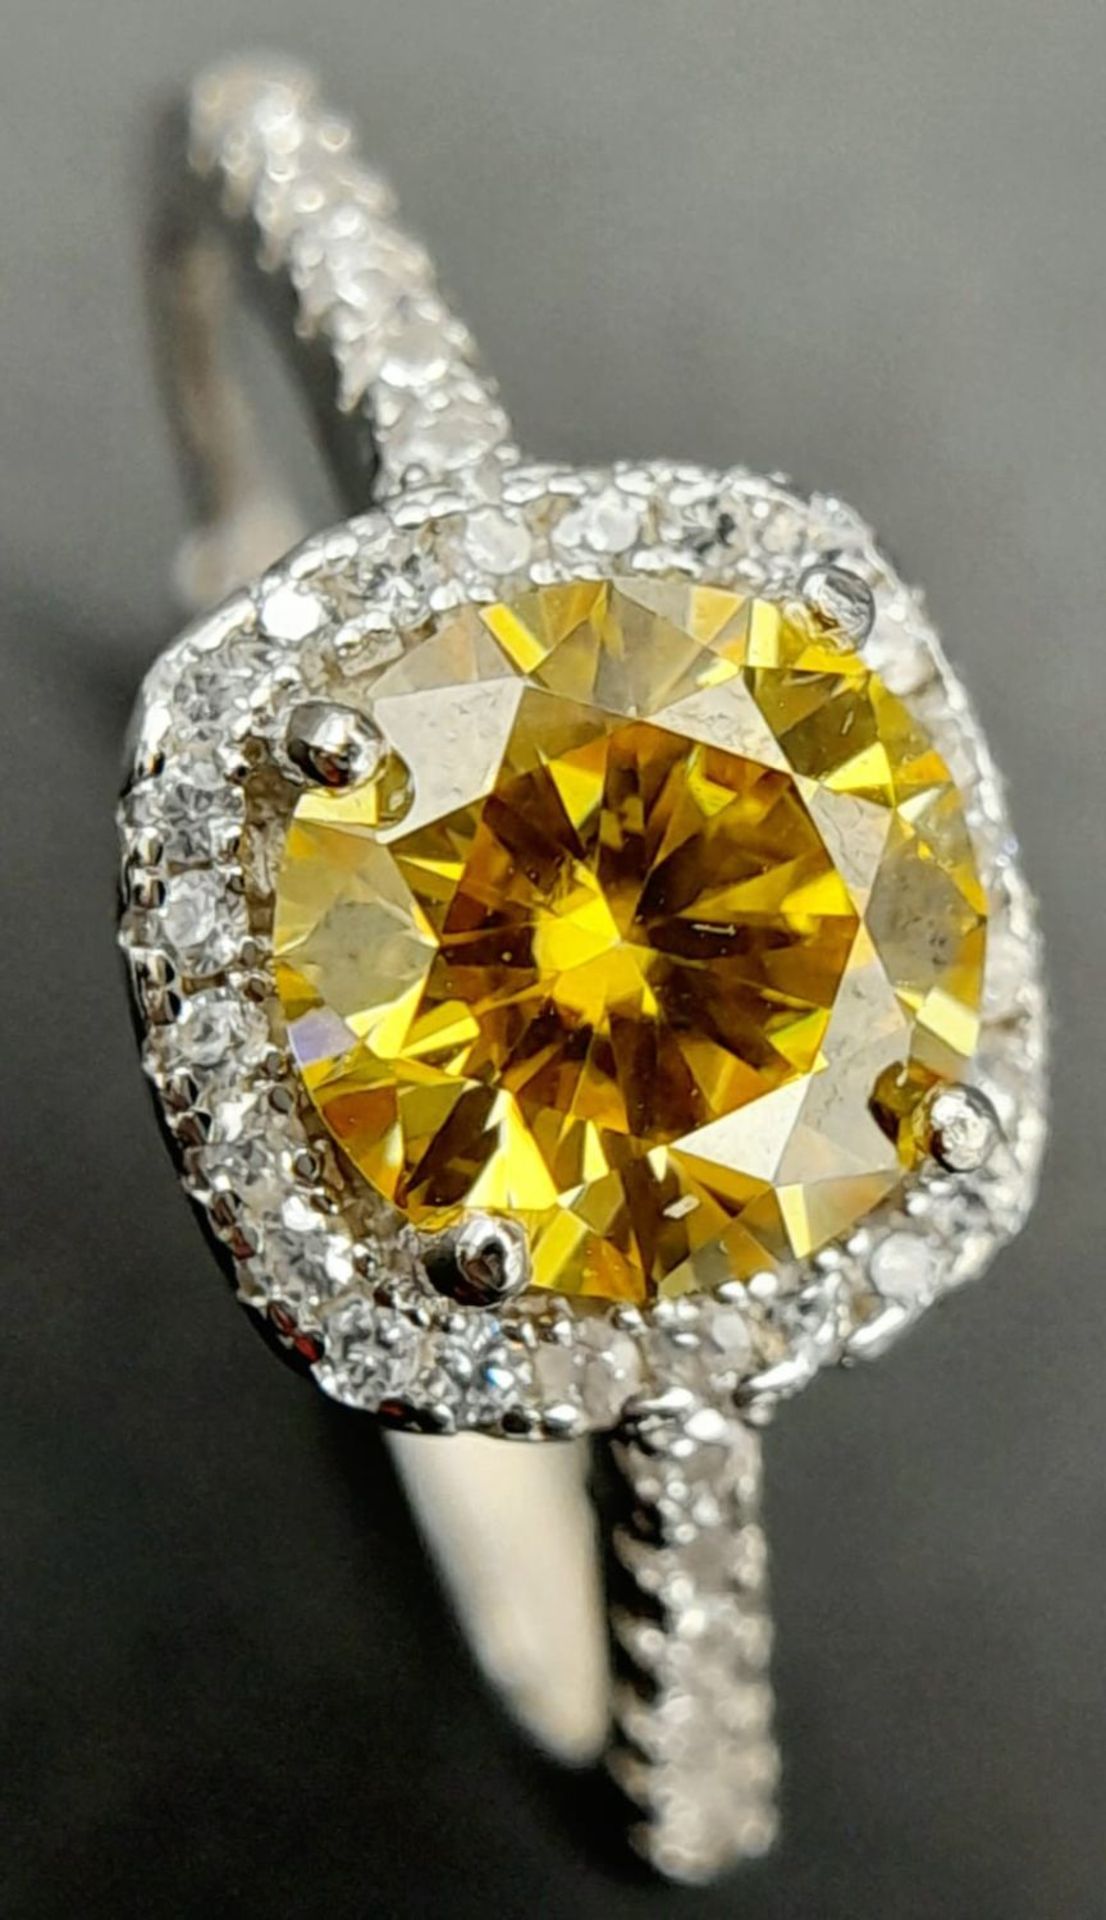 A 1ct Golden Yellow Moissanite Ring. VVS1 Grade. Comes with a GRA certificate. Size N. - Bild 3 aus 6